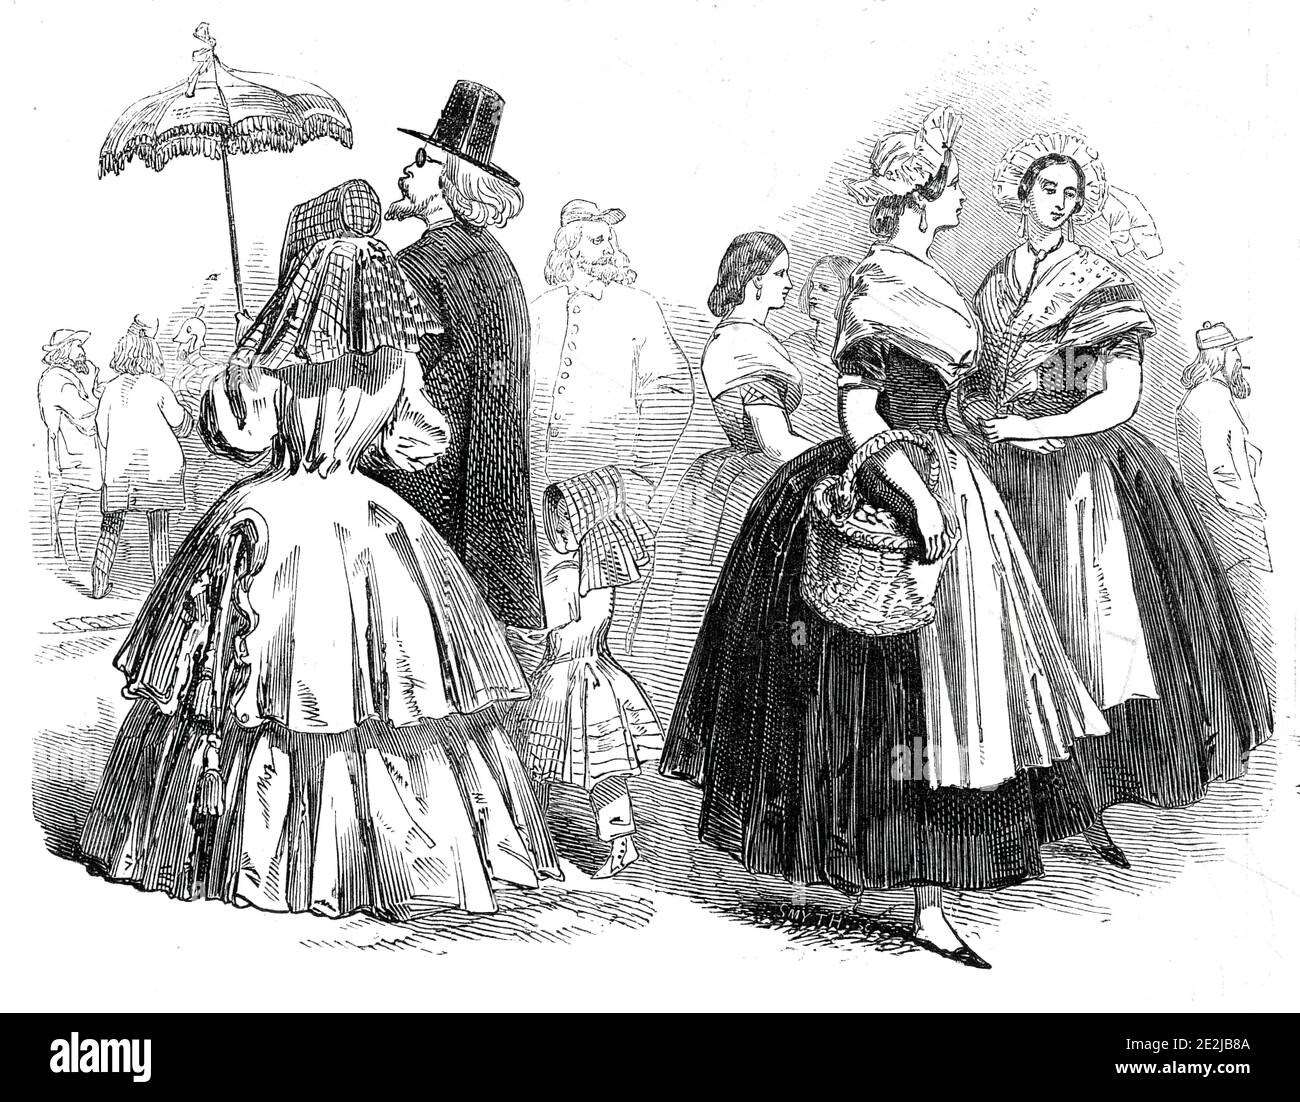 Sketch in Cologne, 1845. A family, and two women, Germany. '...the lady has on a morning bonnet, with a long &quot;curtain,' and a sort of polka pelisse; such as are worn in the country: the fashion is seen, in miniature, in the child's dress. The hat of the gentleman is of unmistakeable Continental magnitude'. The second group shows 'women of the middle class'. From &quot;Illustrated London News&quot;, 1845, Vol VII. Stock Photo